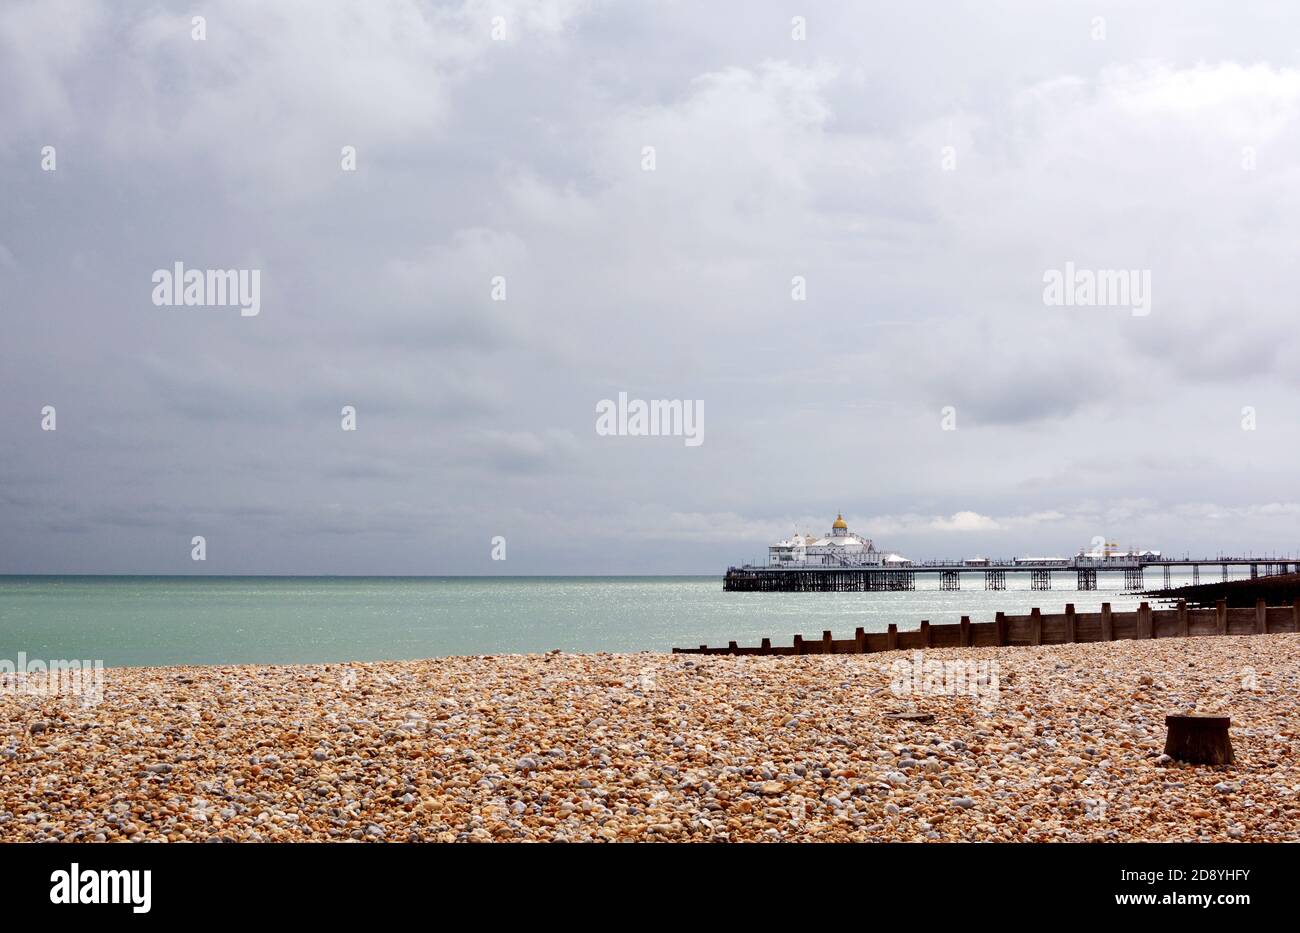 View across shingle beach to Eastbourne pier on the English coast, with stormy summer skies Stock Photo